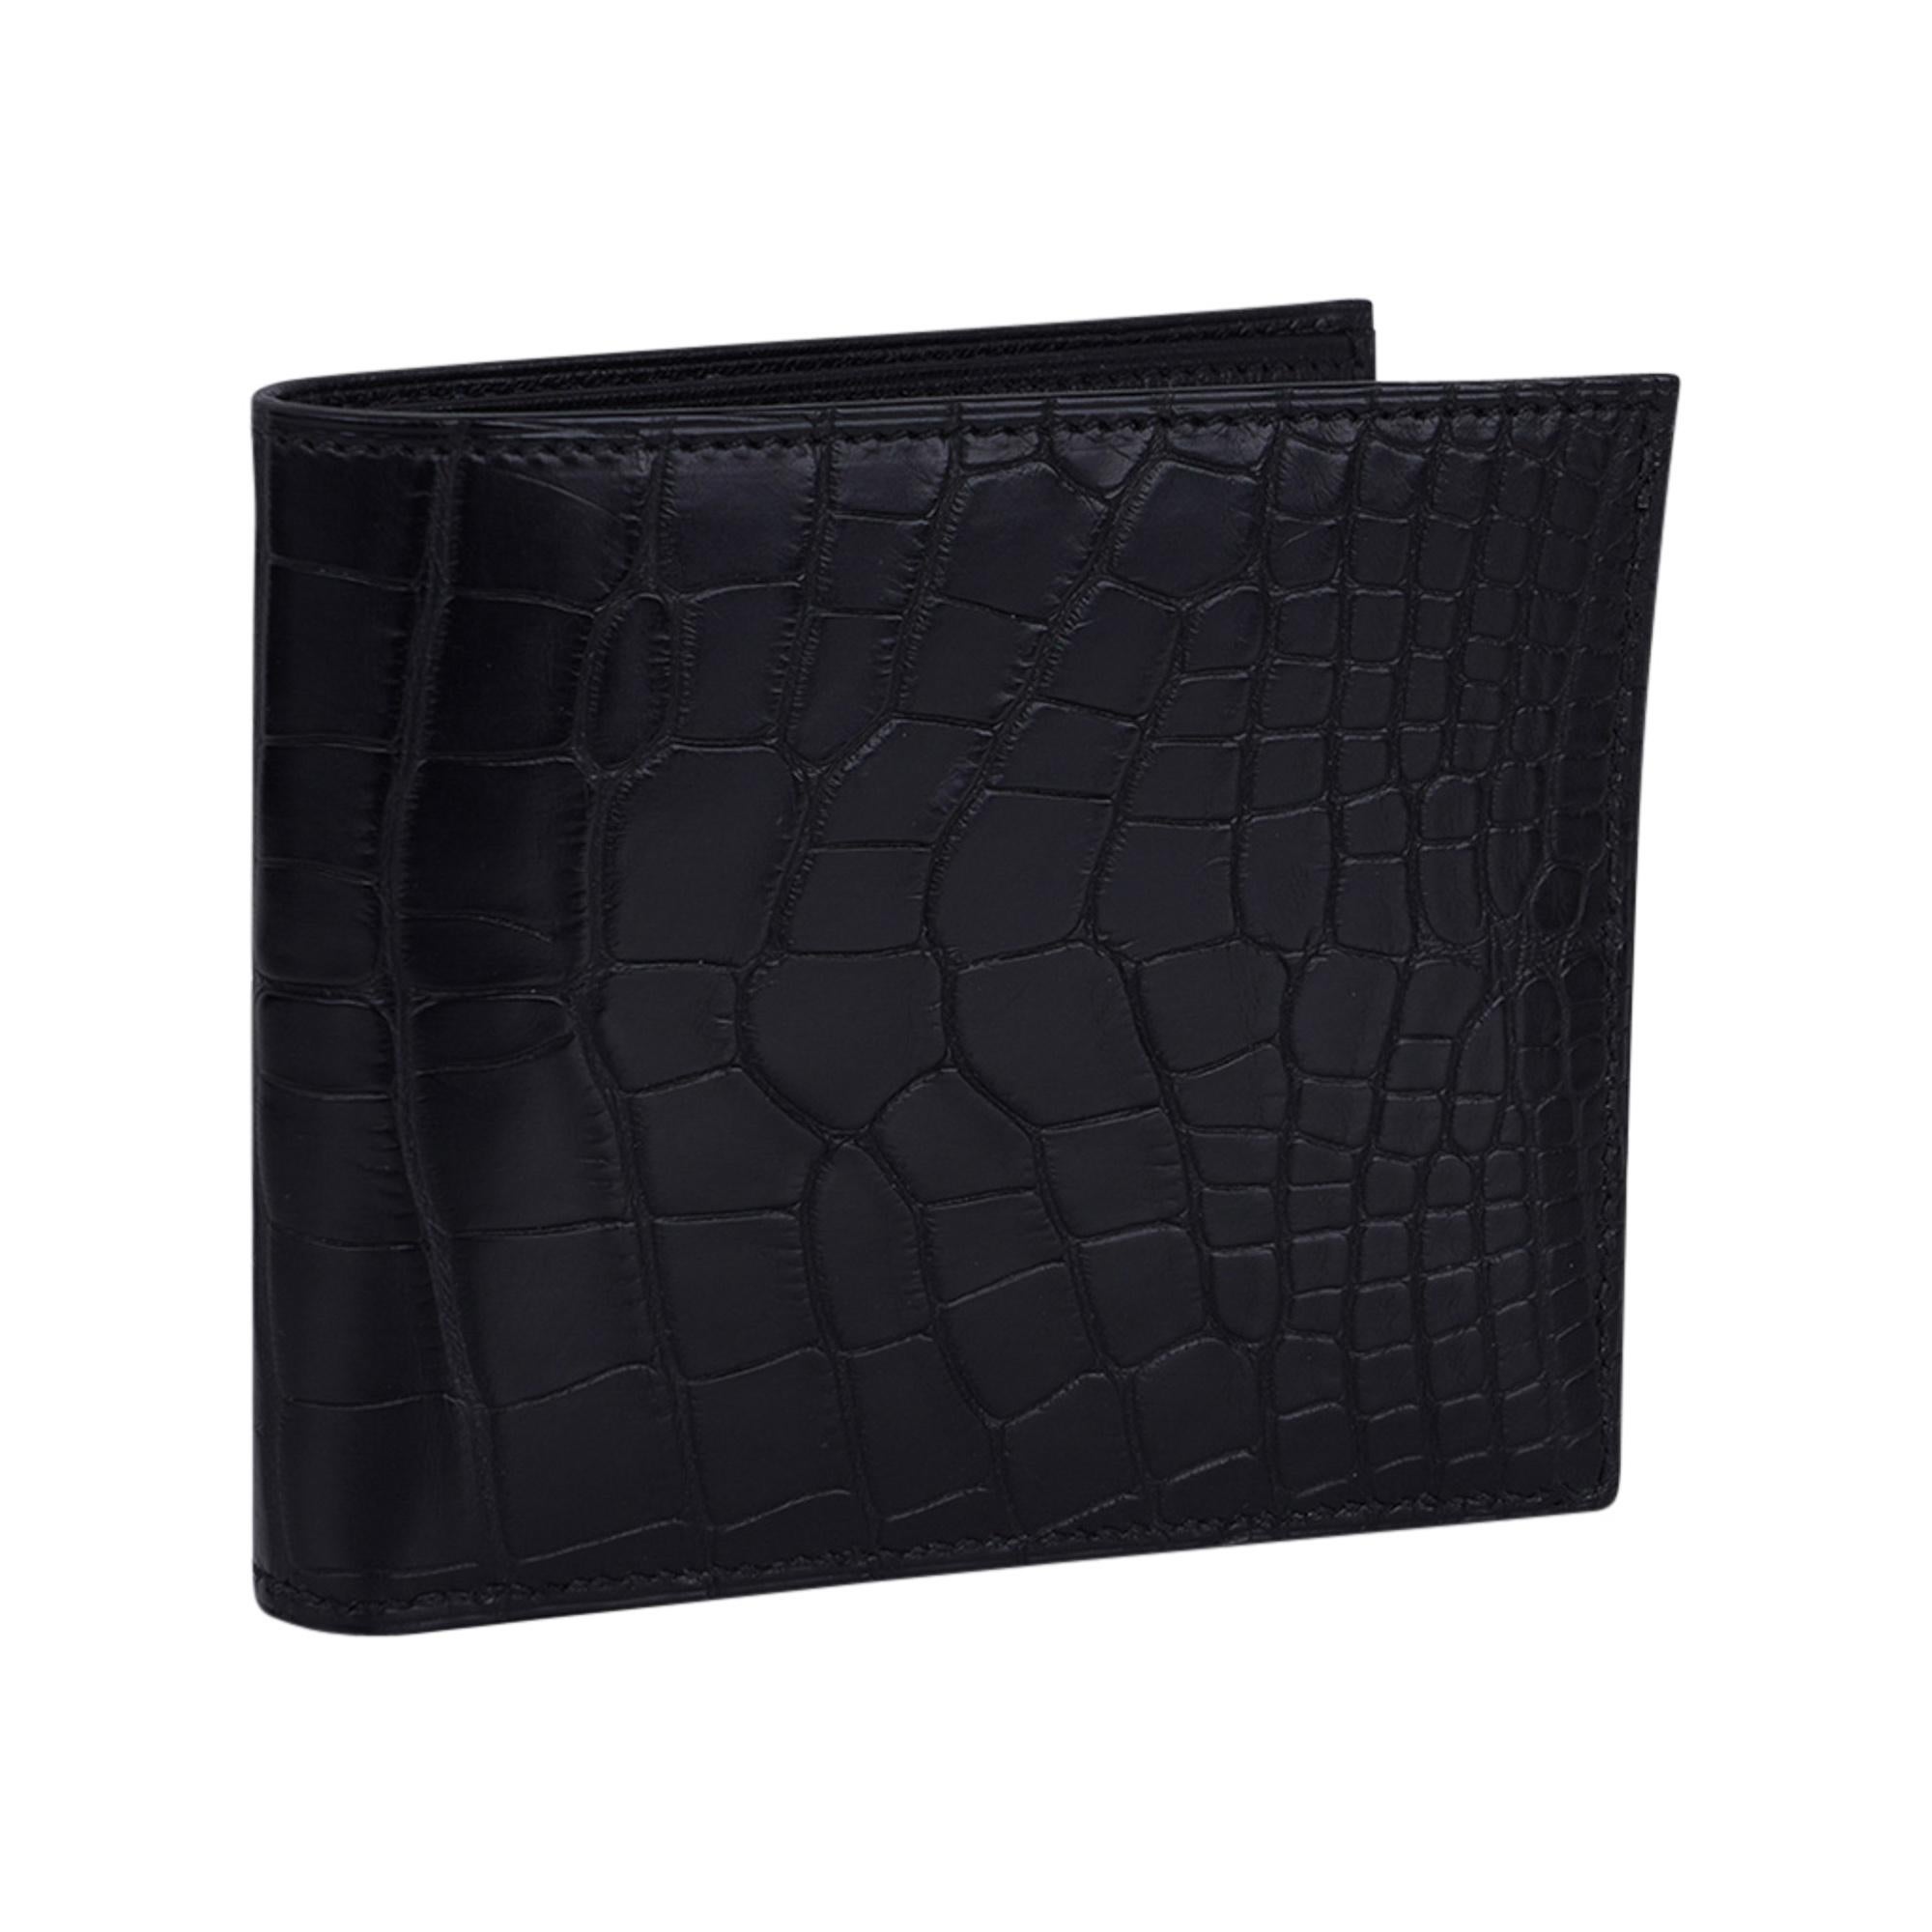 Mightychic offers an Hermes Men's Black MC2 Copernic compact bi-fold wallet featured in Black  matte Alligator.
Interior is chevre with eight credit card slots, two flat pockets and one paper money slot.
Sleek clean lines.
HERMES Paris Made in